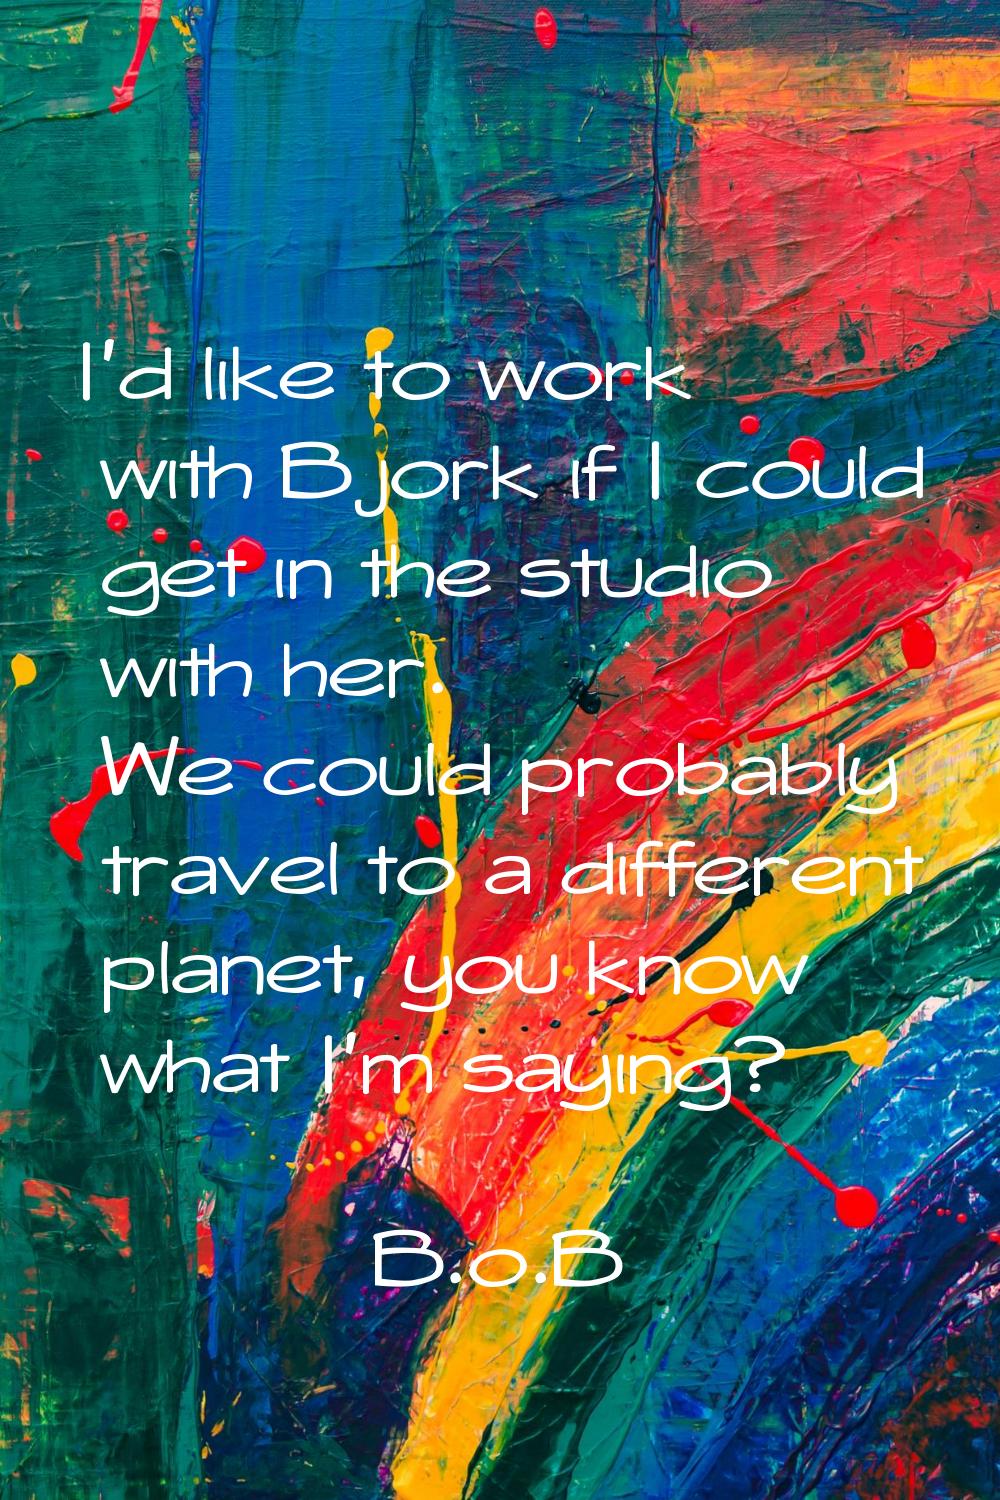 I'd like to work with Bjork if I could get in the studio with her. We could probably travel to a di